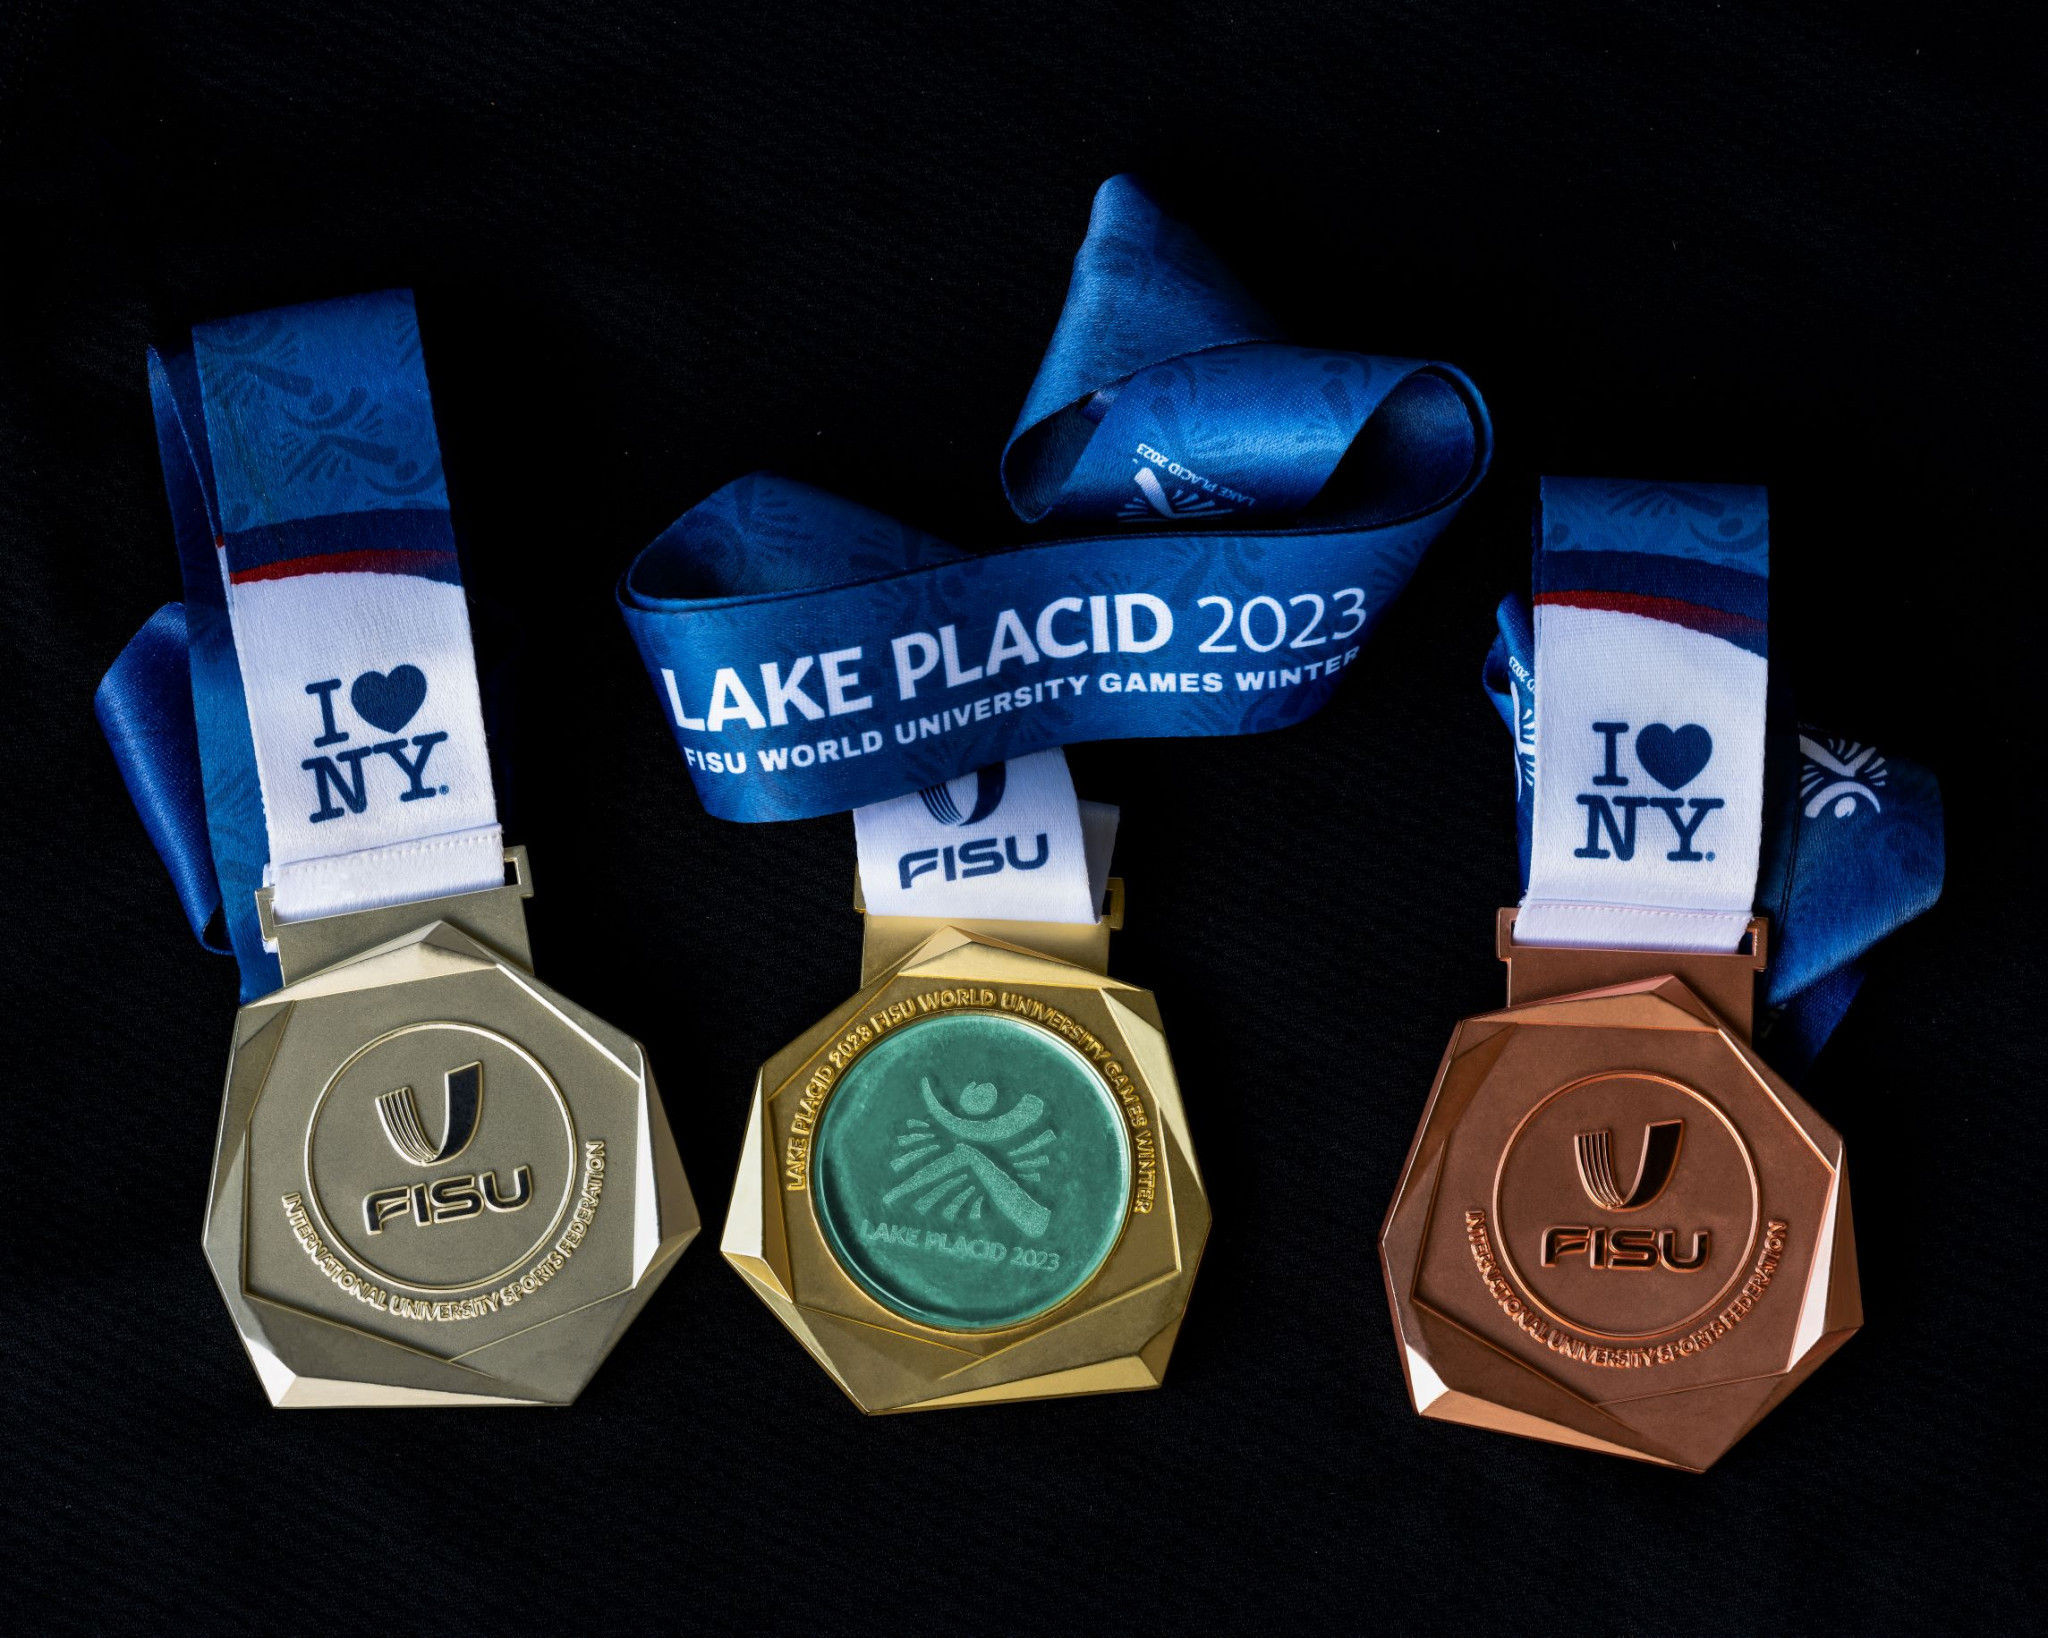 The medals for the Winter World University Games have been inspired by the winter environment in Lake Placid ©Lake Placid 2023